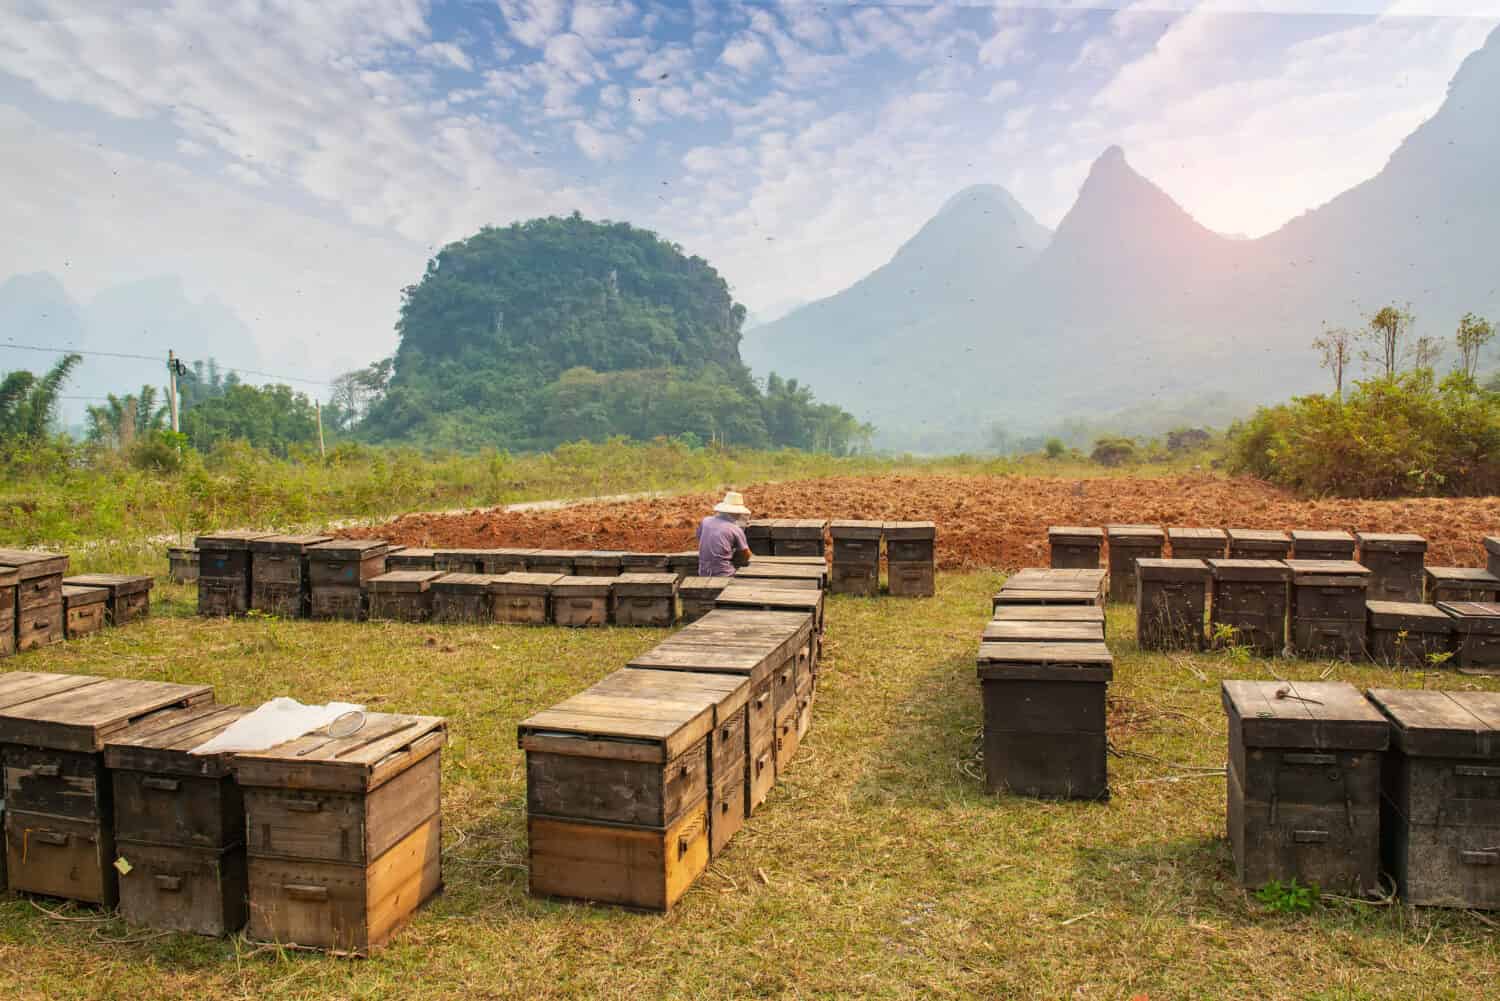 wooden hives in the outdoors guilin,guangxi, china